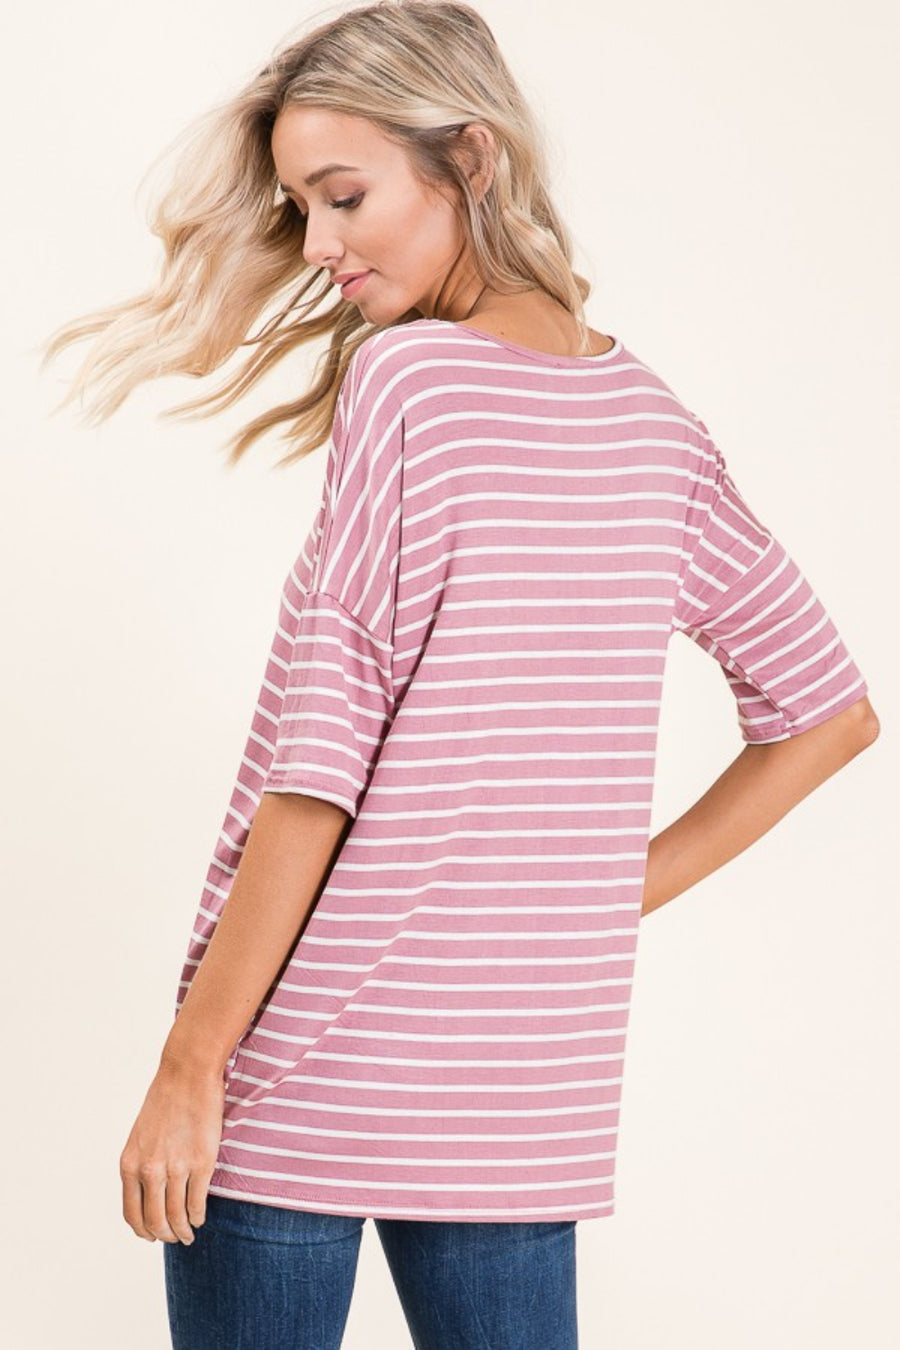 Must Have Been Me Striped Tee